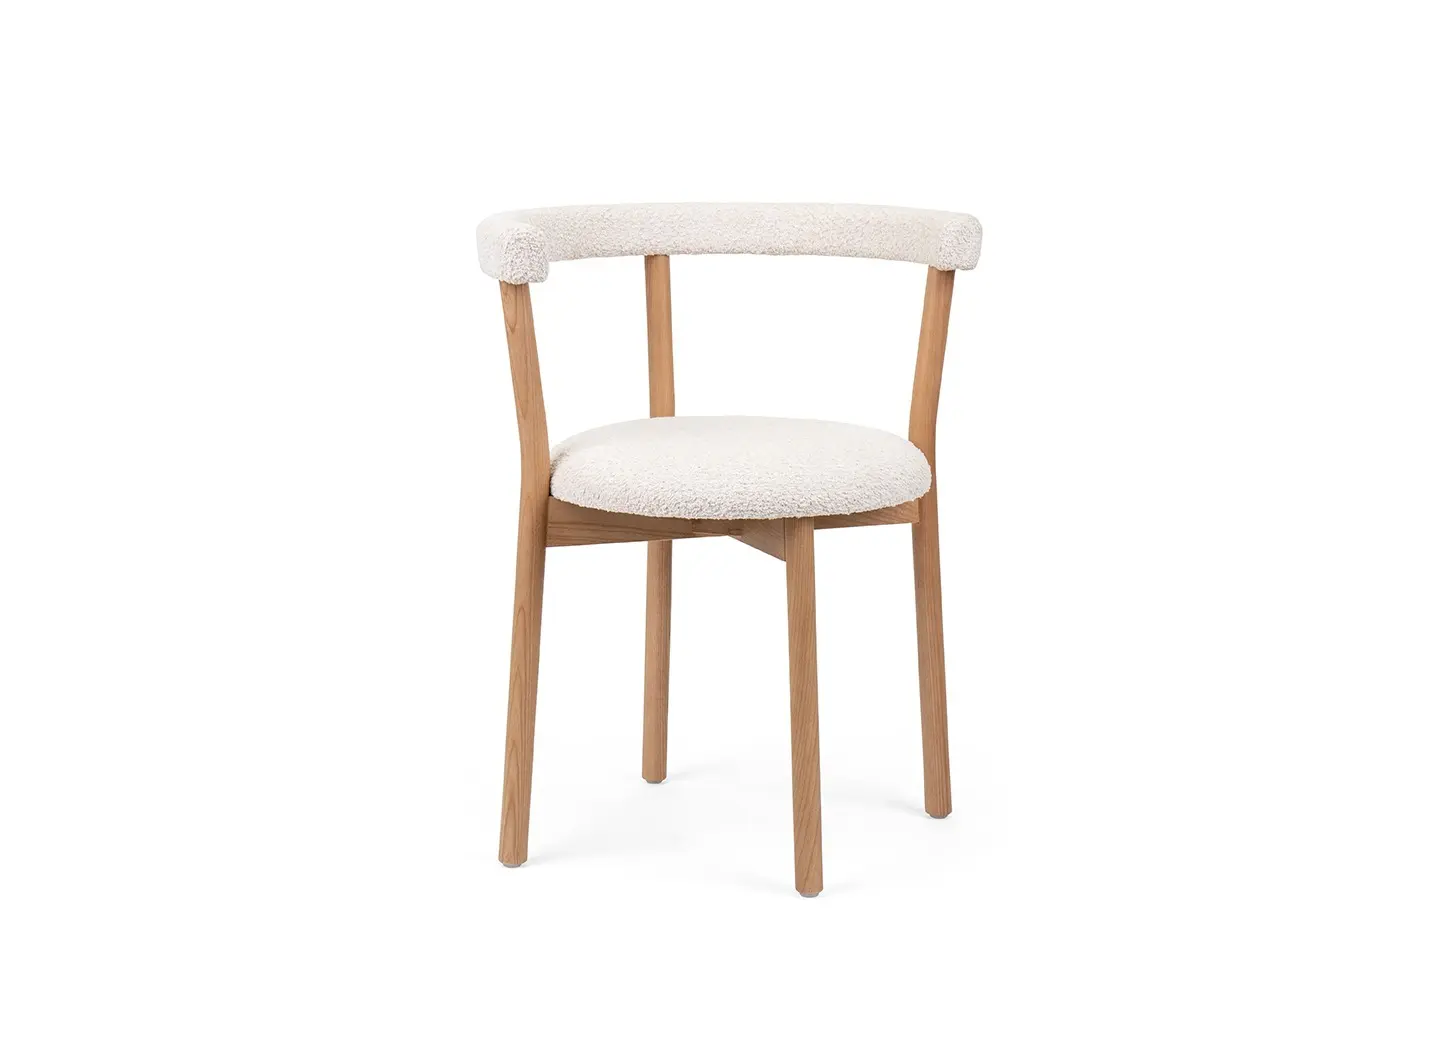 Twist Upholstered Dining Chair by Studio Segers